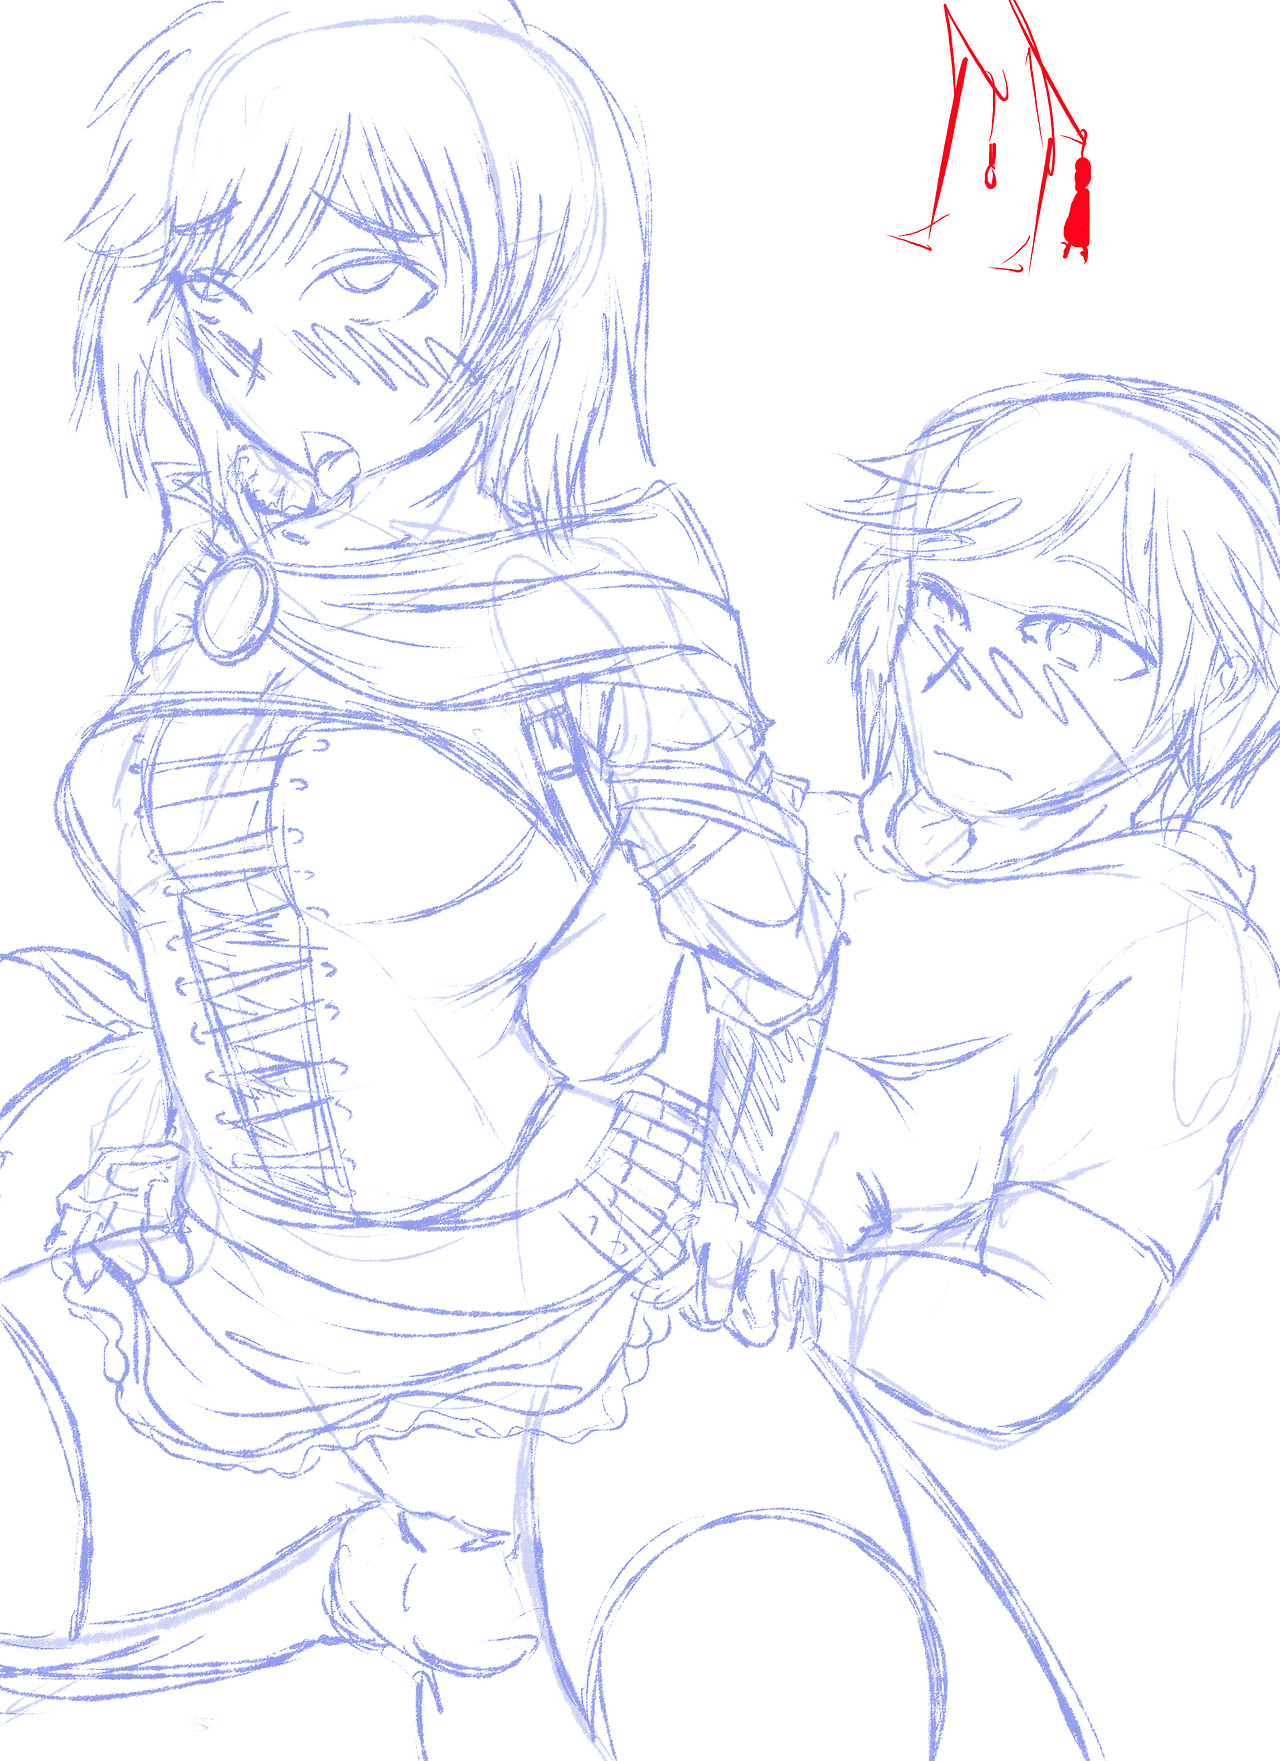   pat req description : I was thinking Ruby riding Jaune reverse-cowgirl style, with